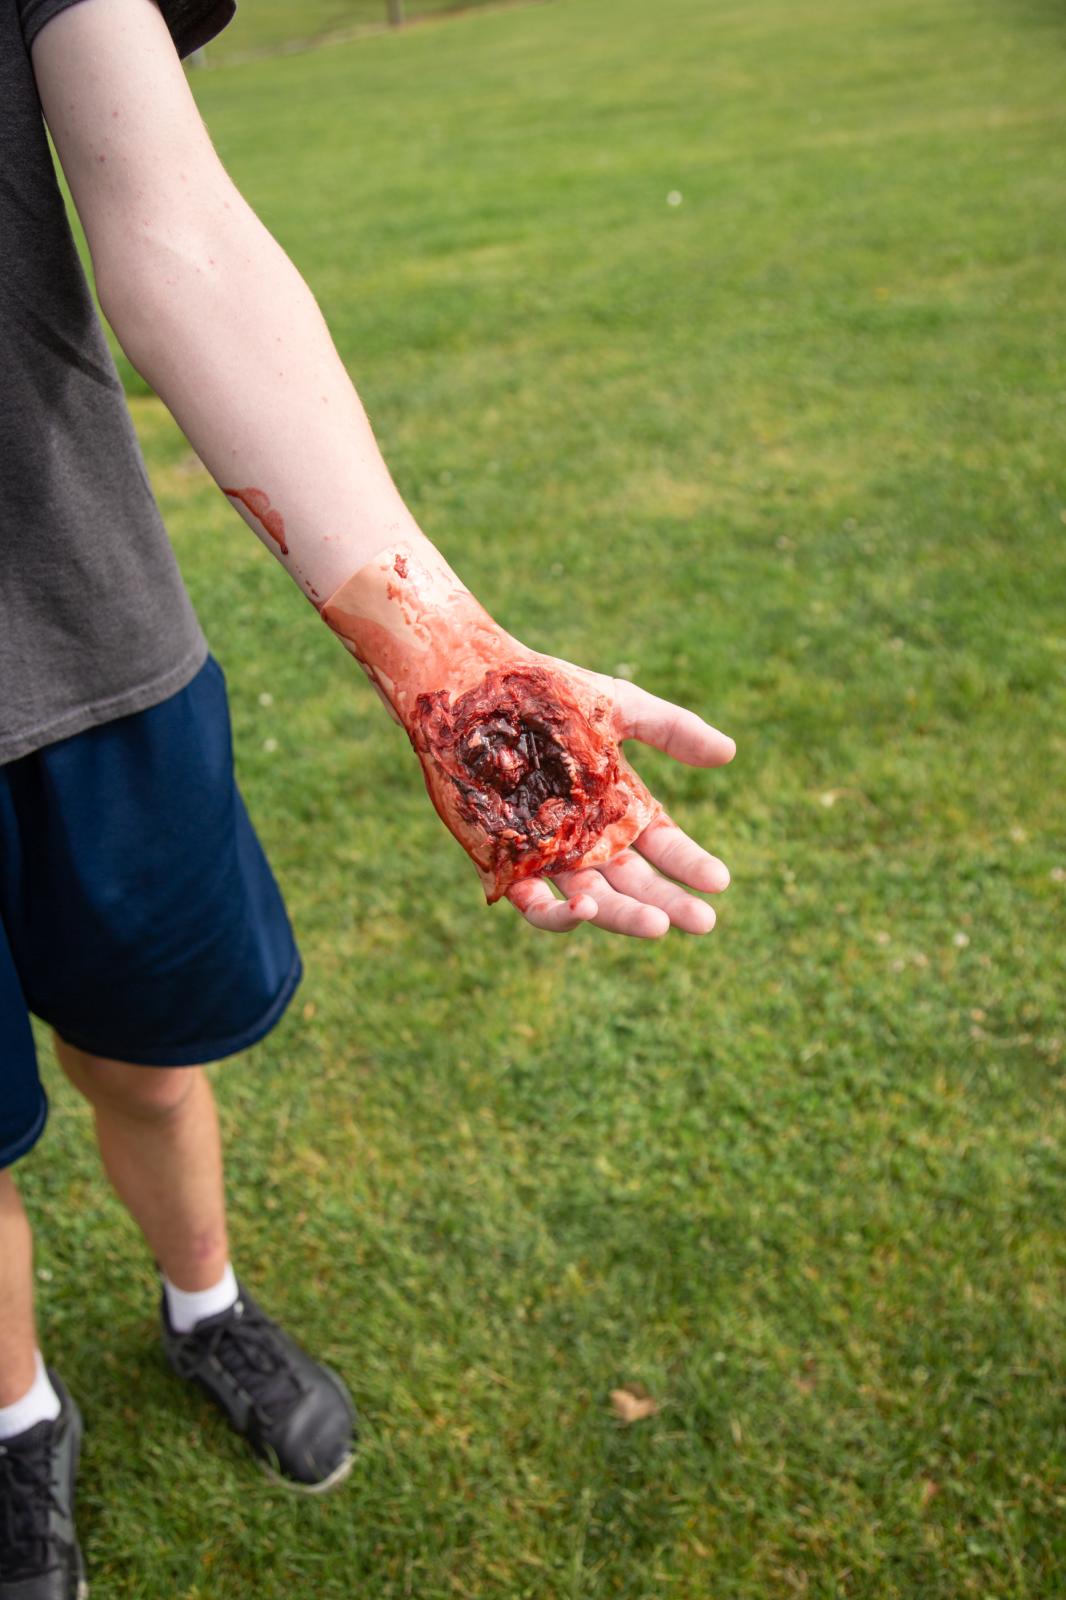 HELL DRILL * Warning: Sensitive Content  - Cayden Wills, moulage make-up gunshot wound to the hand.